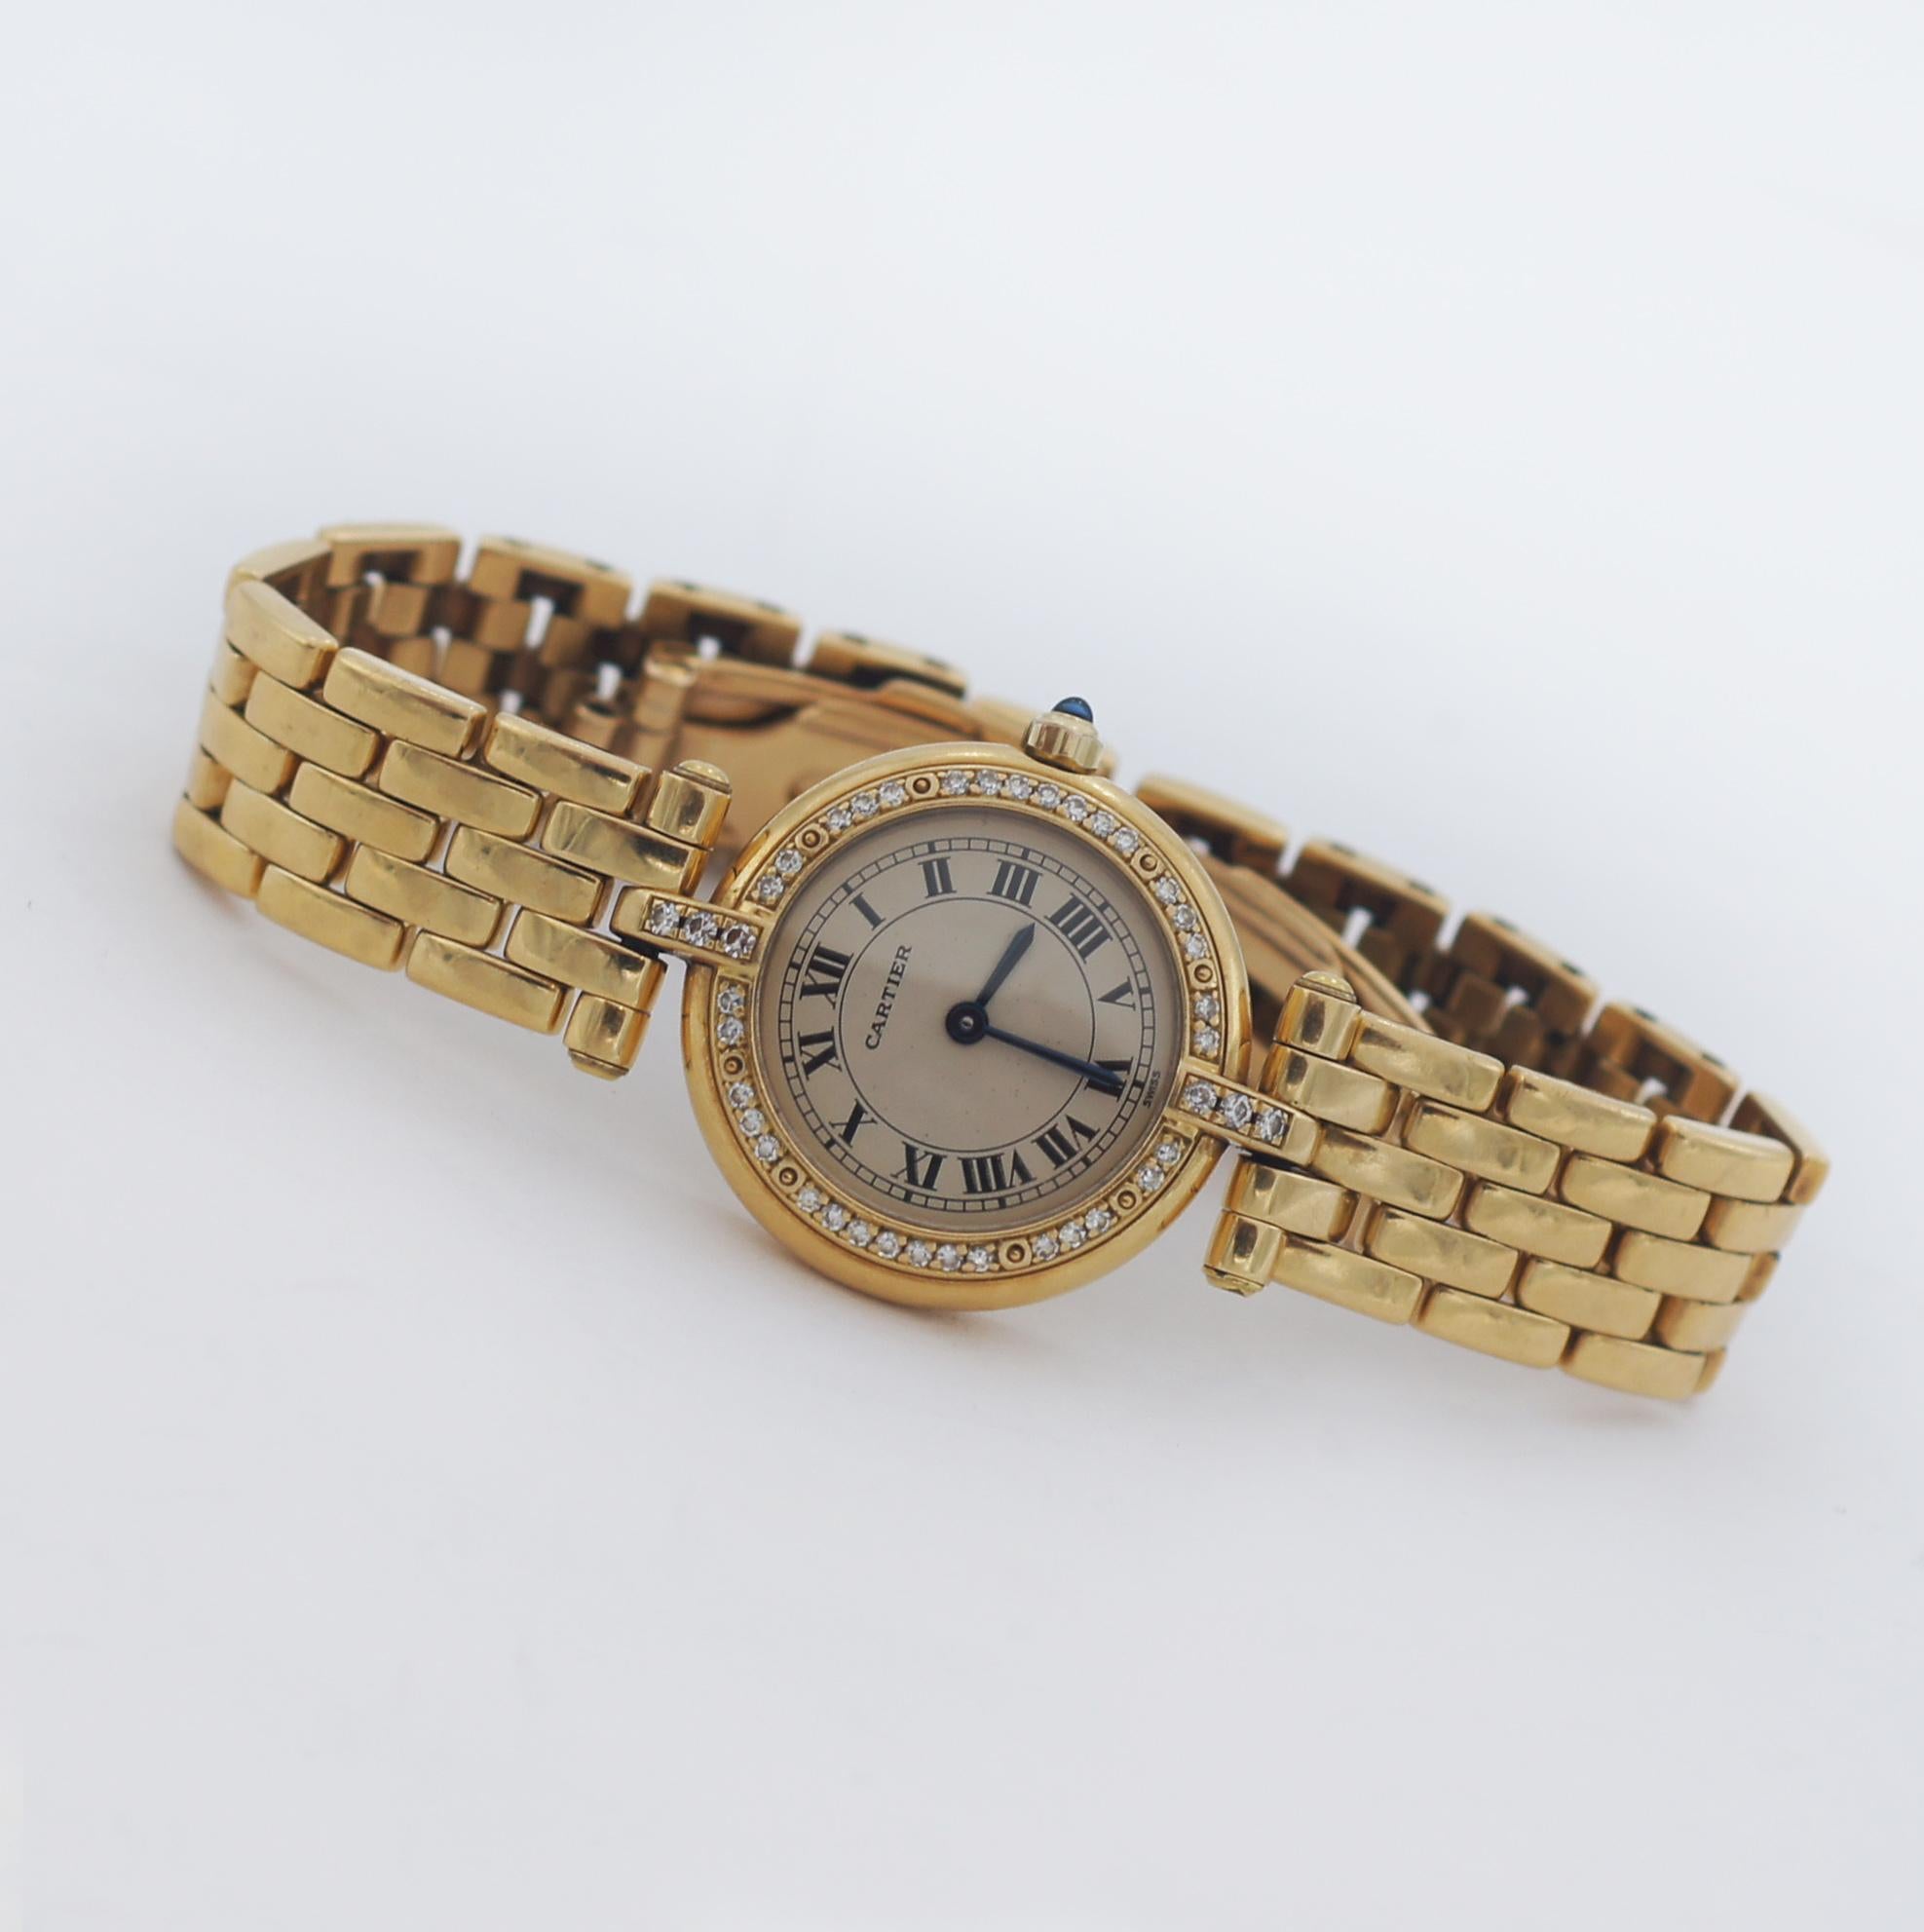 Stunning CARTIER ladies watch
From the Panthère Vendôme Collection
In 18K Yellow Gold case and bracelet.
Swiss made watch.
Round case that it is approx. 24mm in dimension.
Elegant single row Diamond bezel.
White dial with black roman numeral